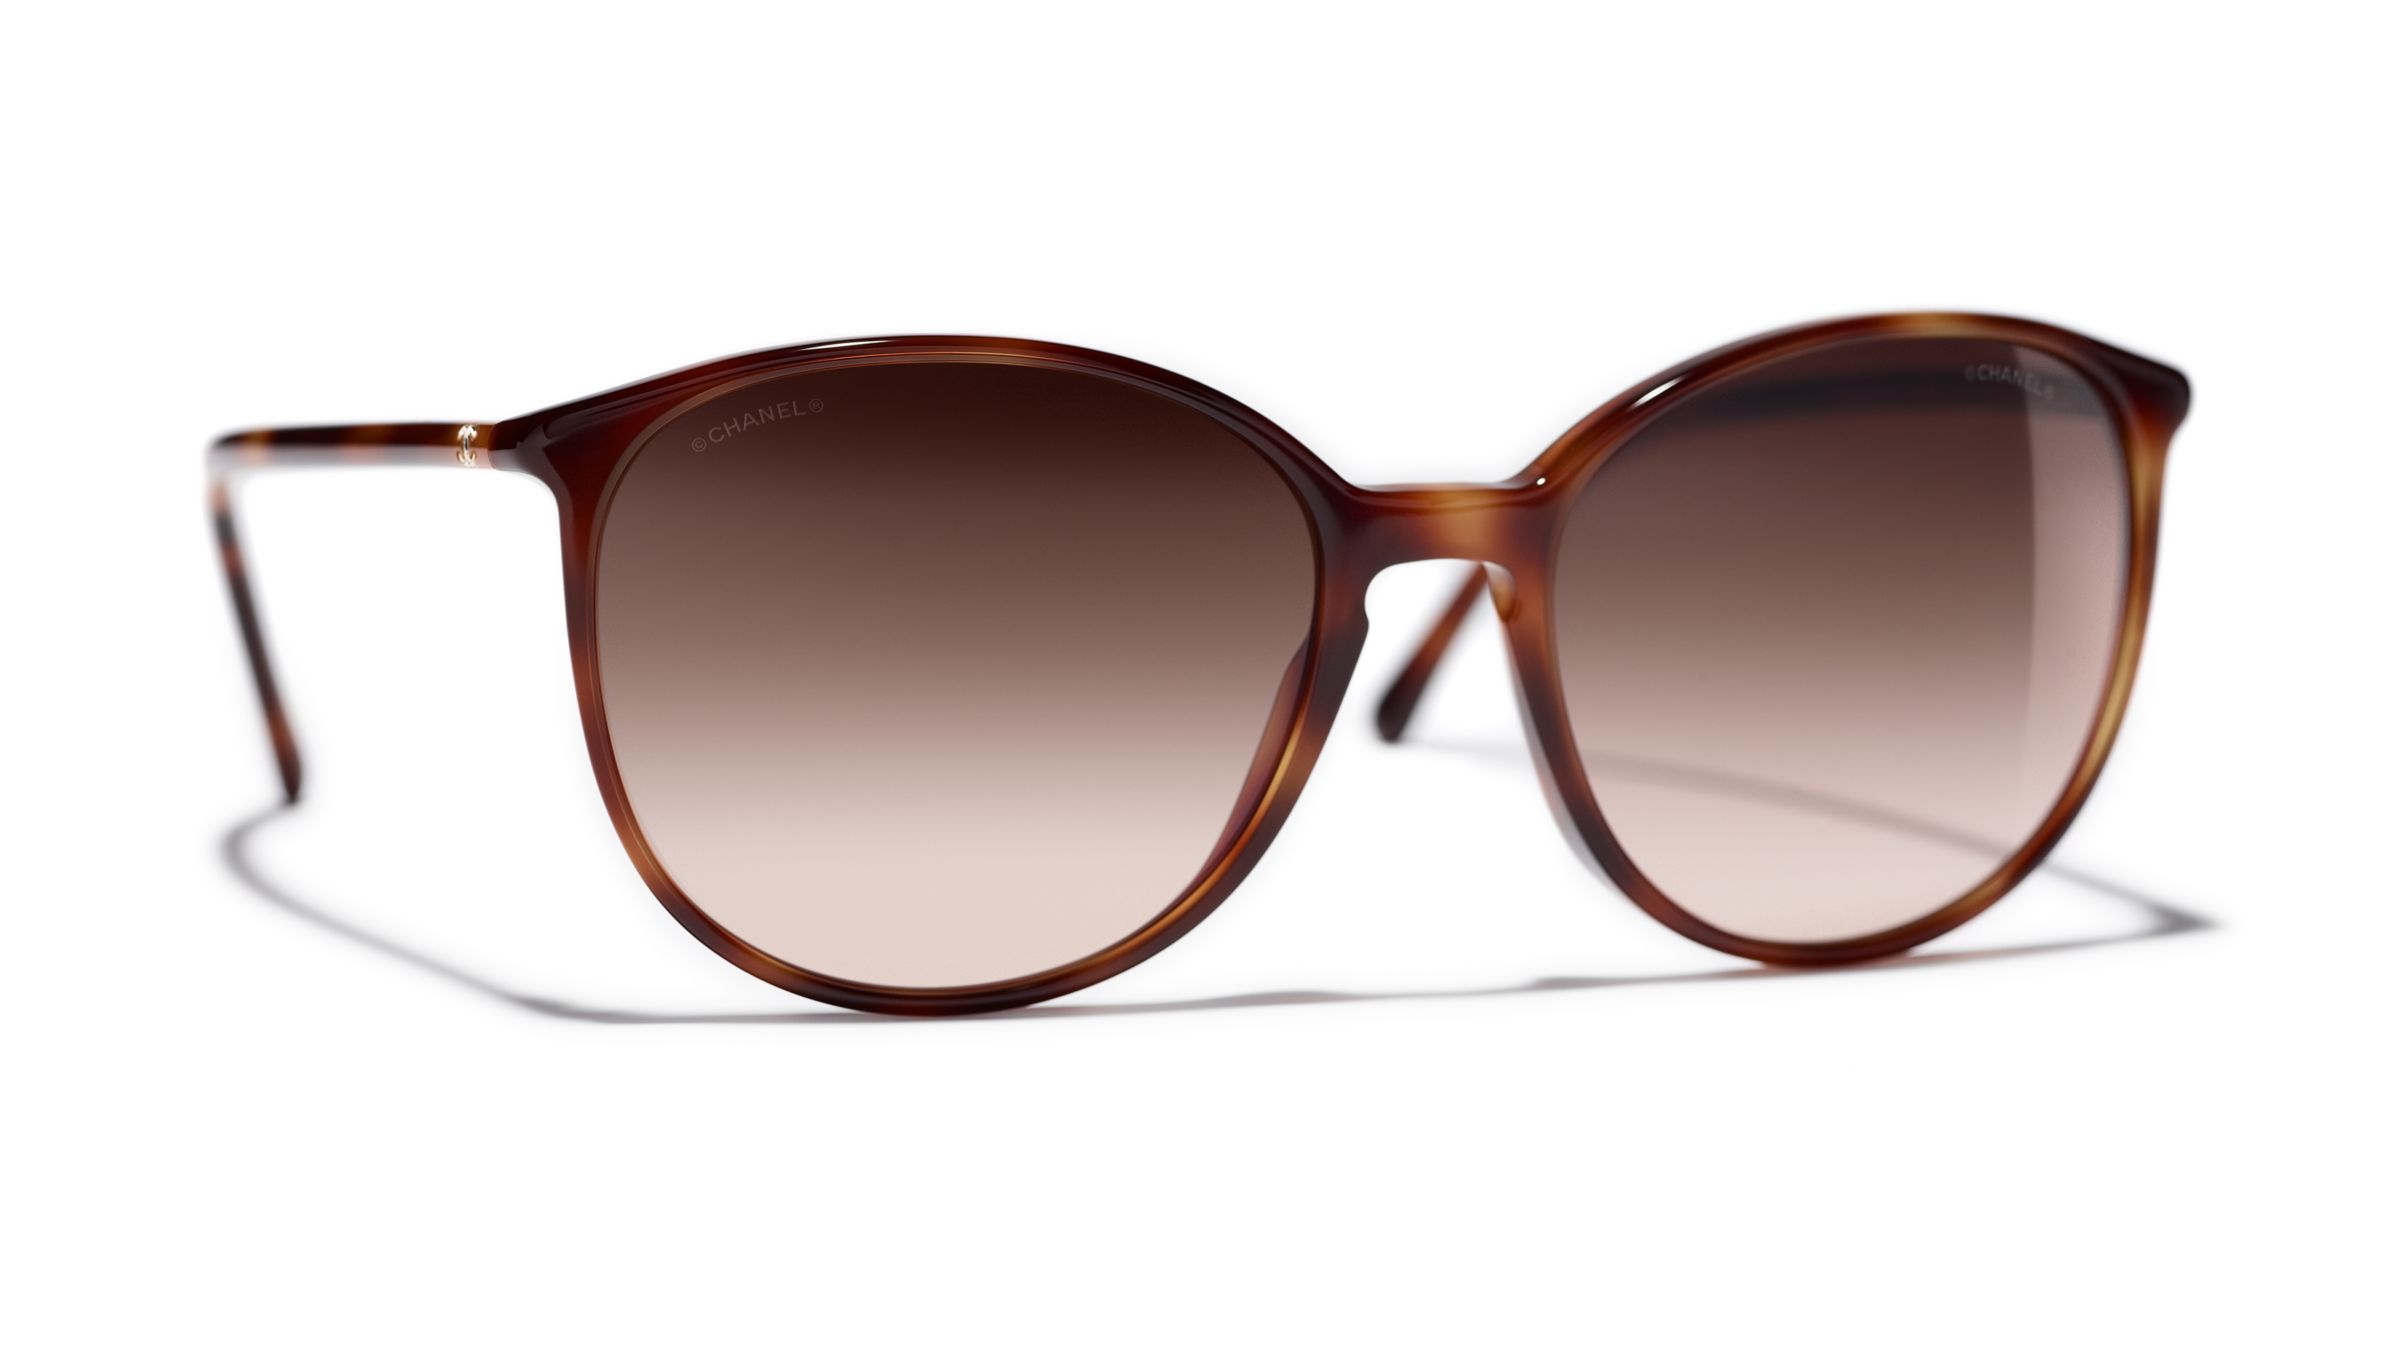 CHANEL Oval Sunglasses CH5278 Tortoise/Brown Gradient at John Lewis ...